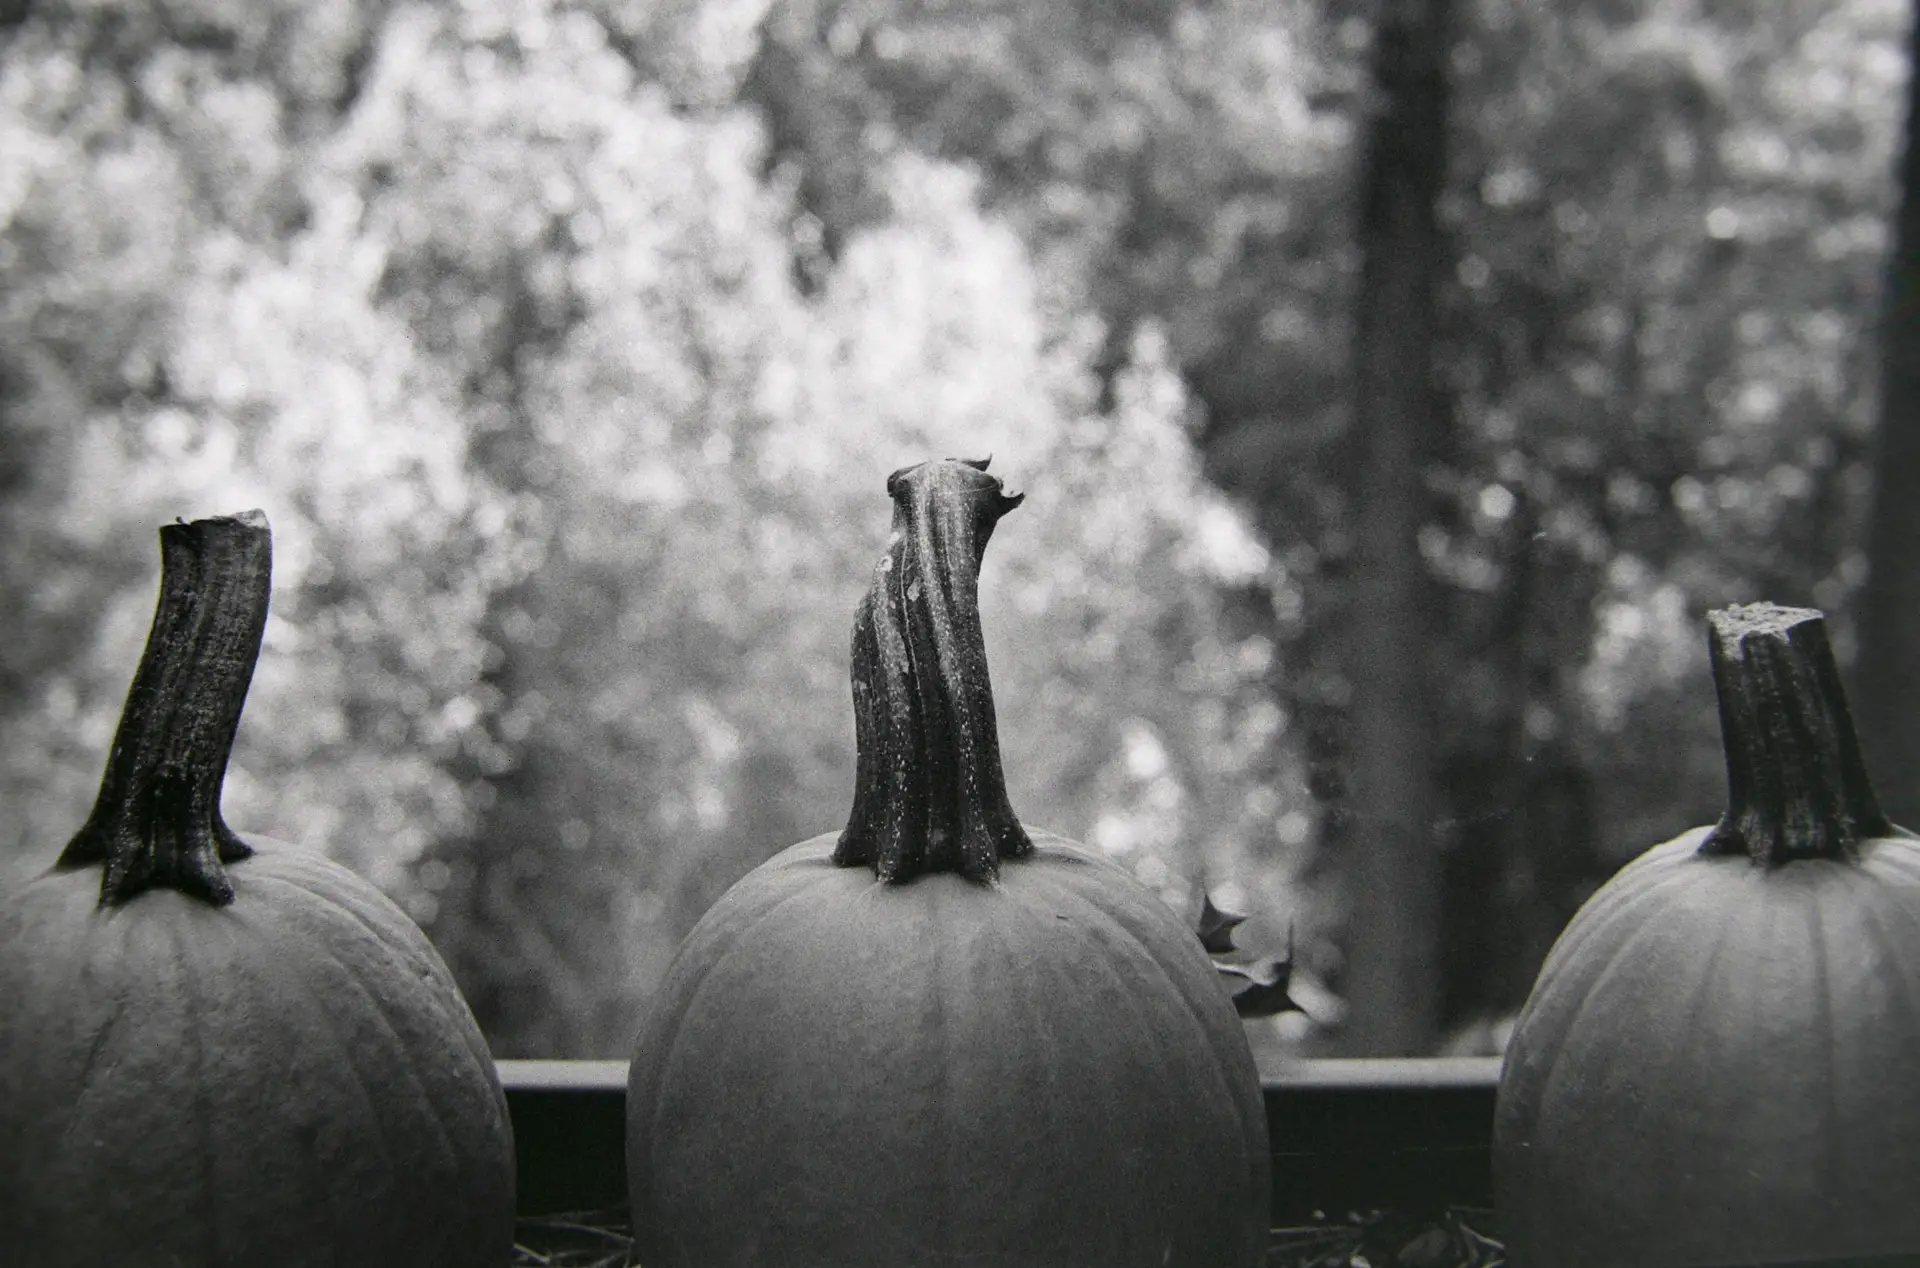 A non-macro shot of mini-pumpkins with trees in the background.